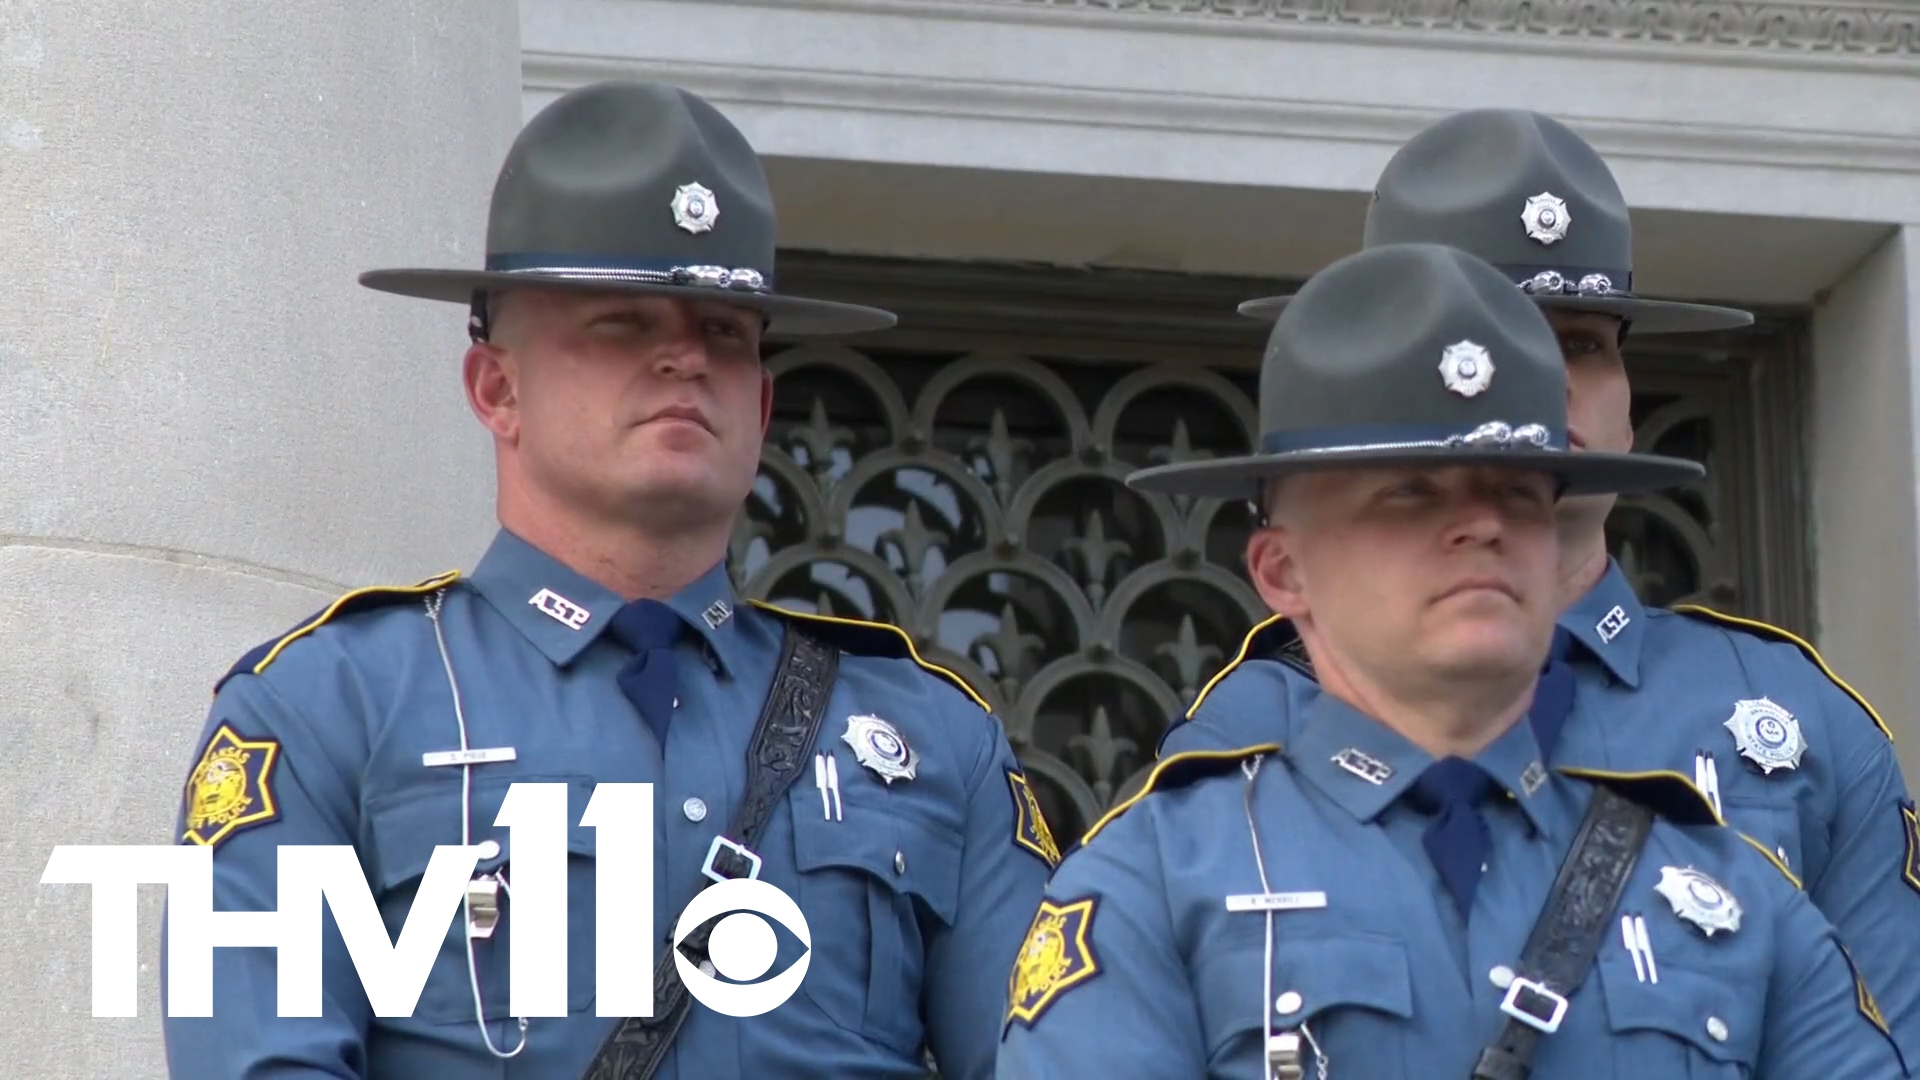 A new class of state troopers graduated and swore their oaths at the Arkansas State Capitol -- but for one trooper, wearing the badge and hat was in his genes.